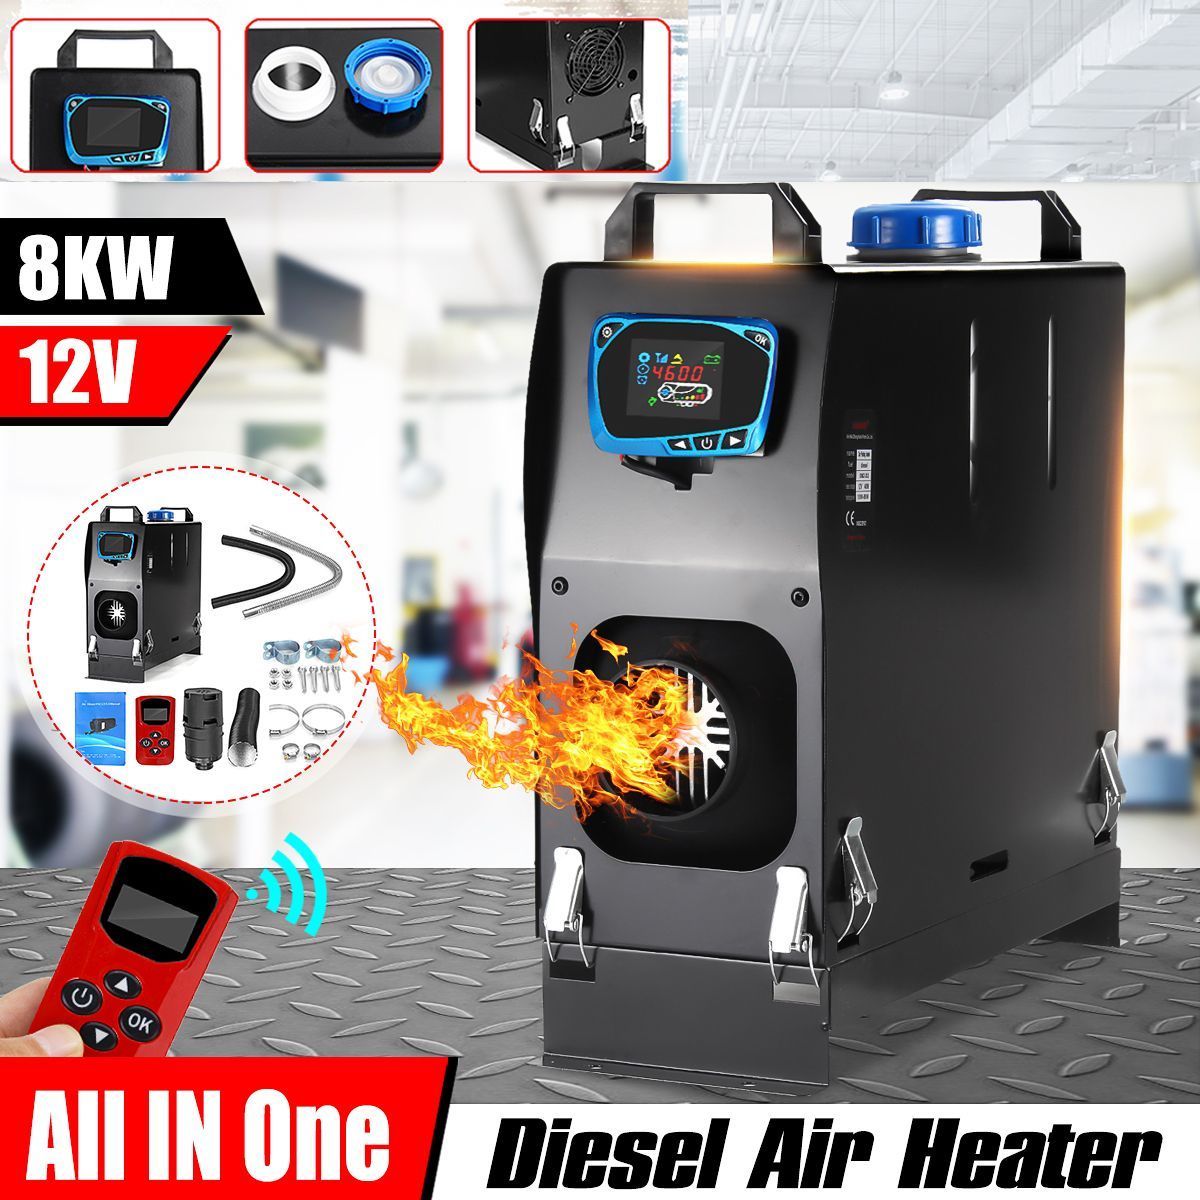 All-In-One-12V-8KW-Diesel-Air-Heater-Car-Parking-Heater-Single-Hole-with-LCD-Screen-Remote-Control-B-1692885